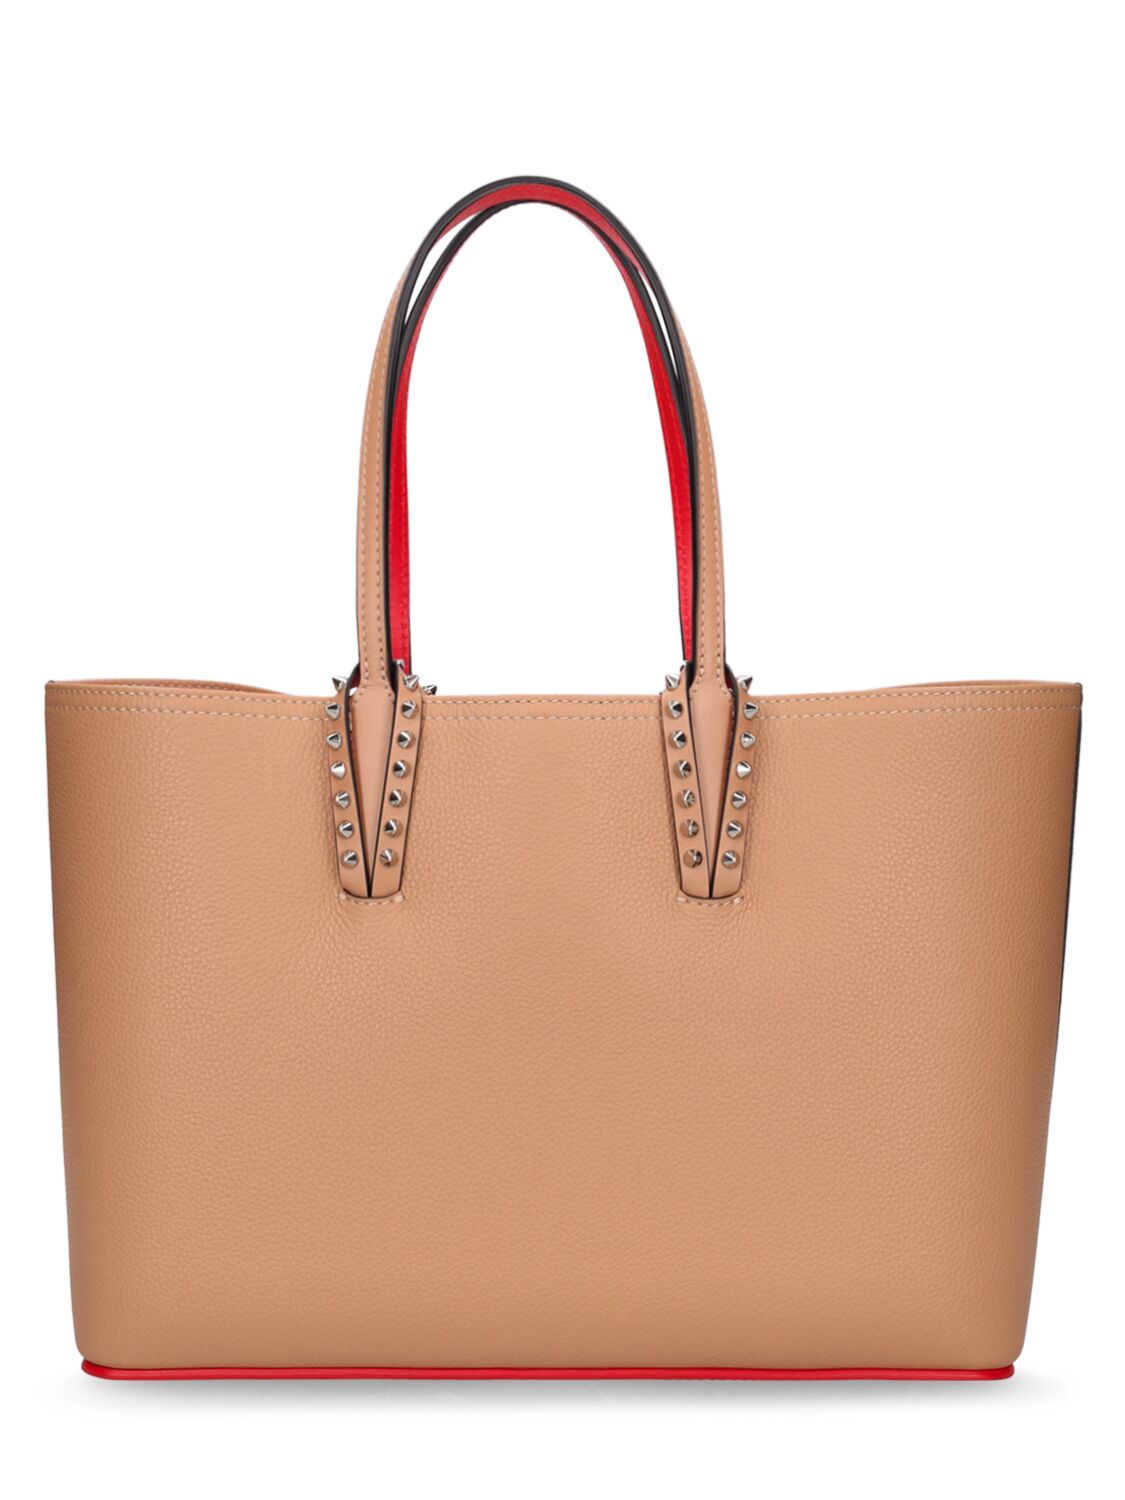 Image of Small Cabata Leather Tote Bag